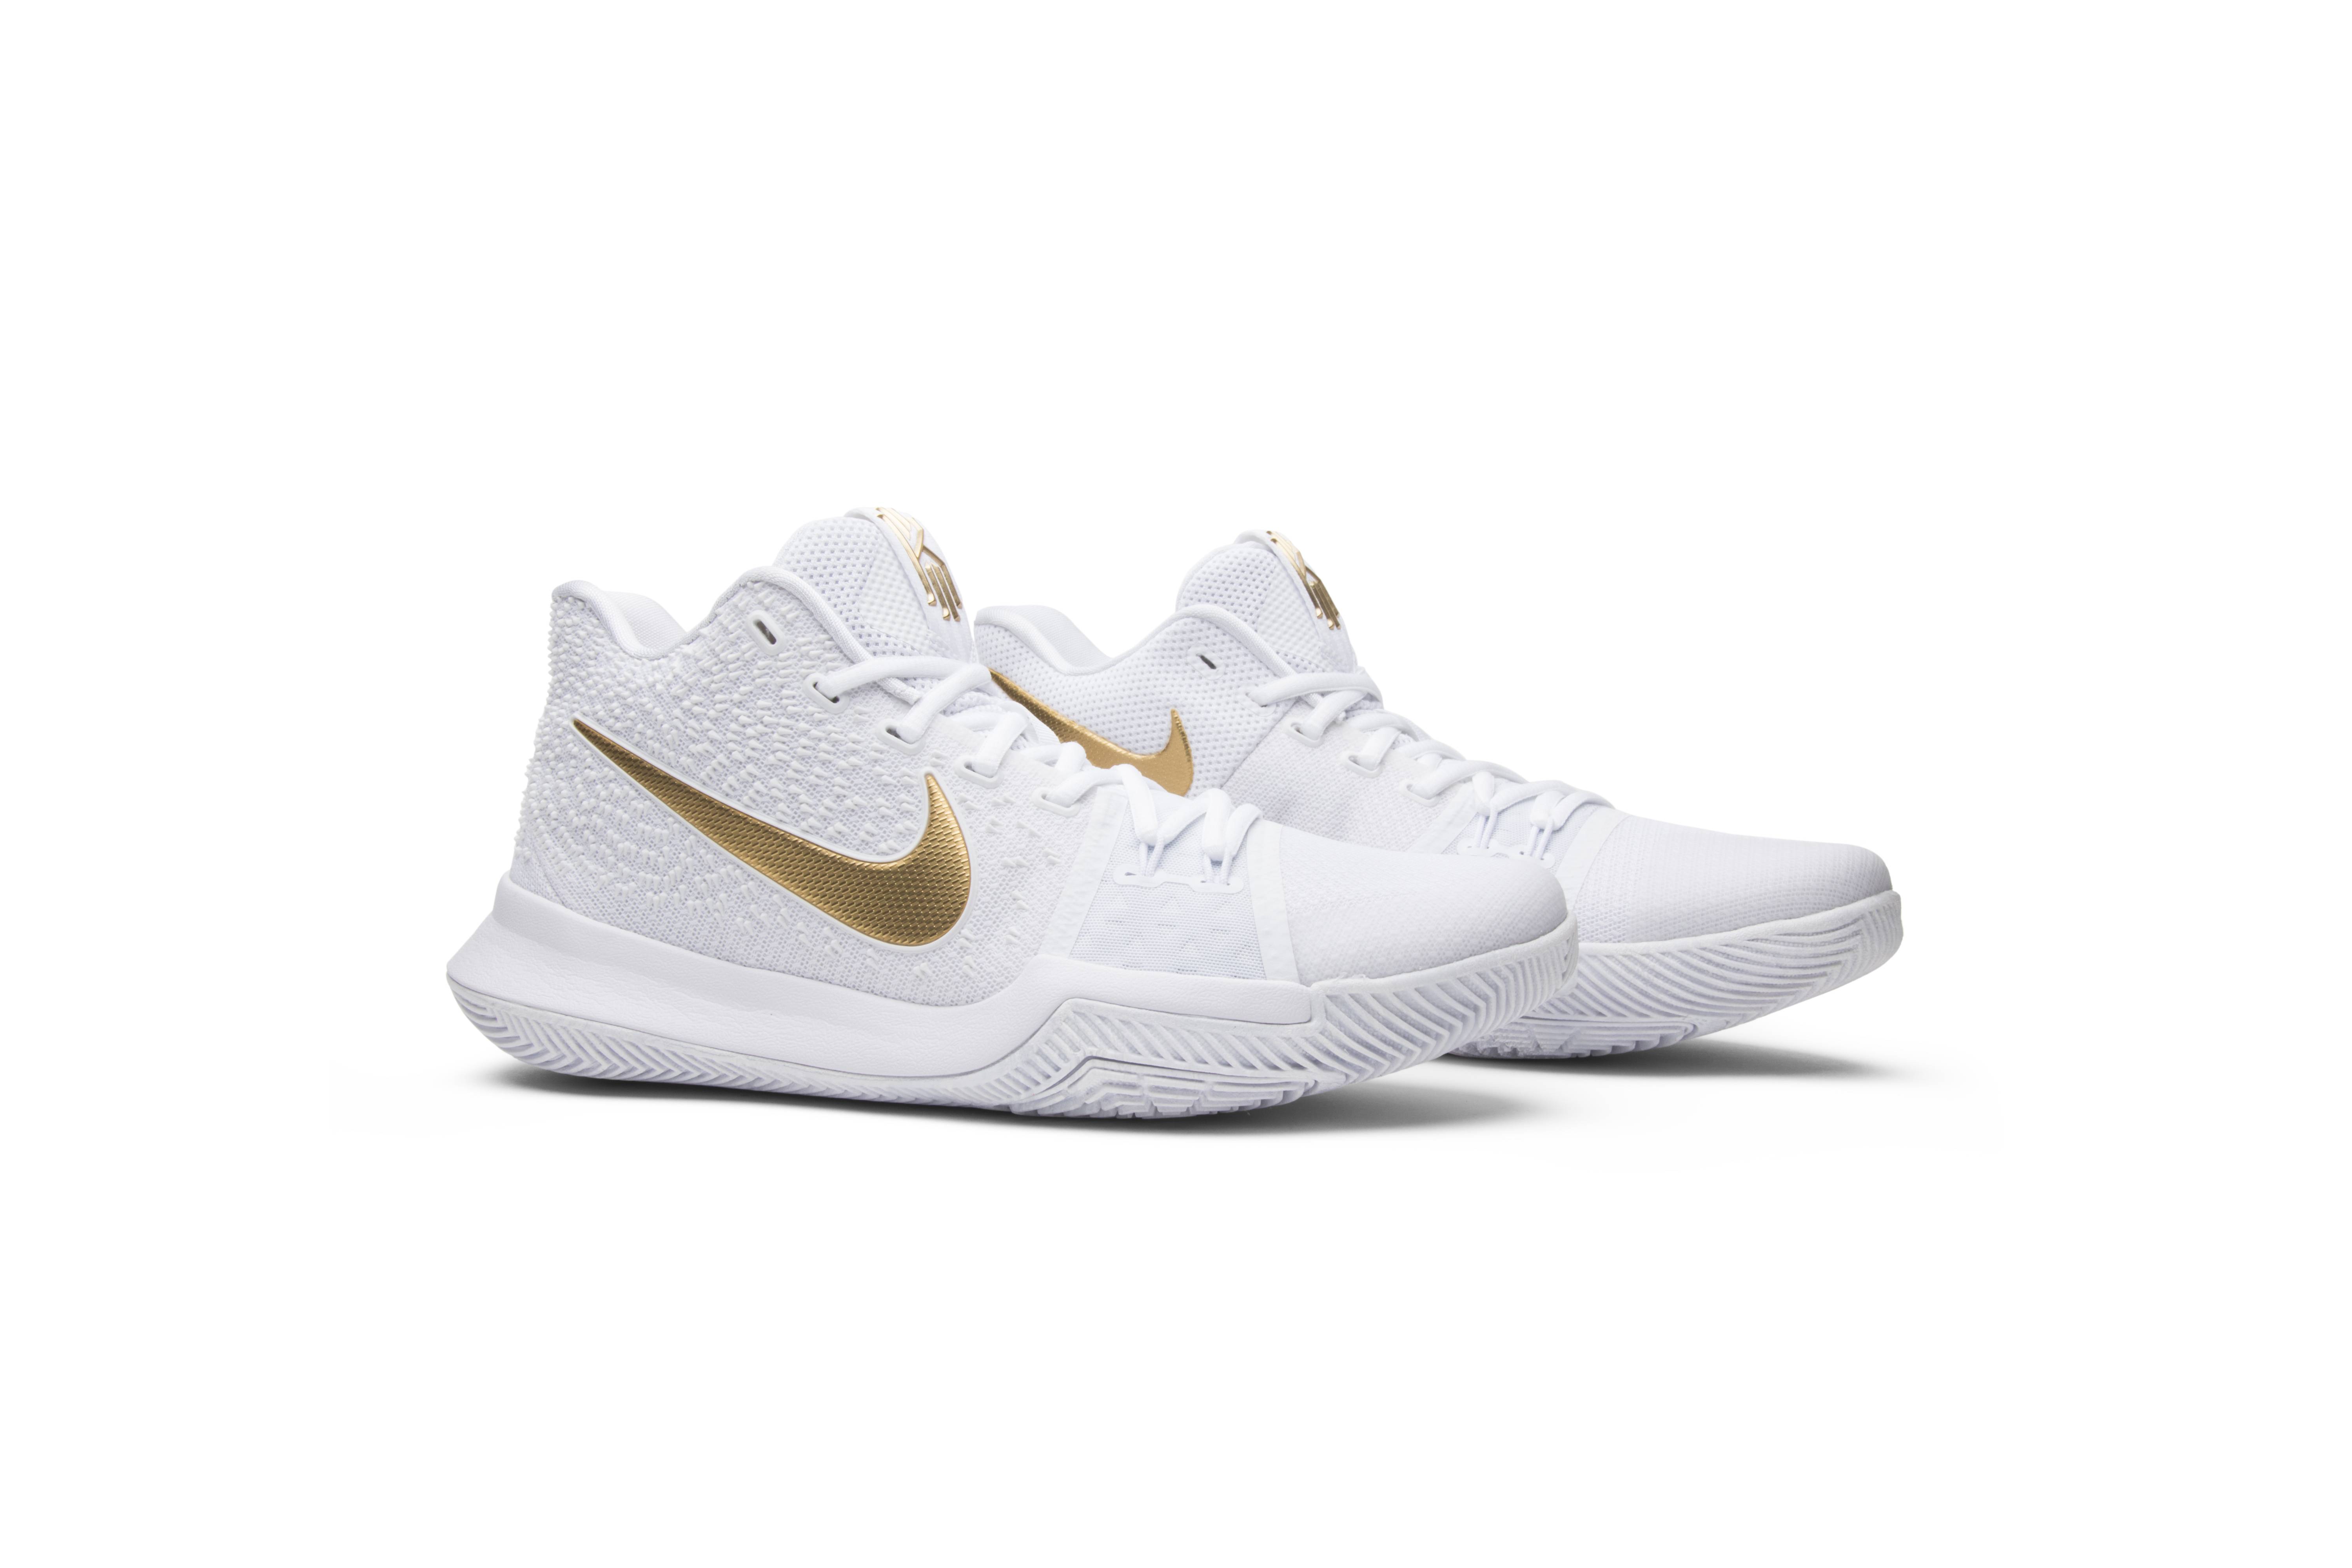 nike kyrie 3 finals gold